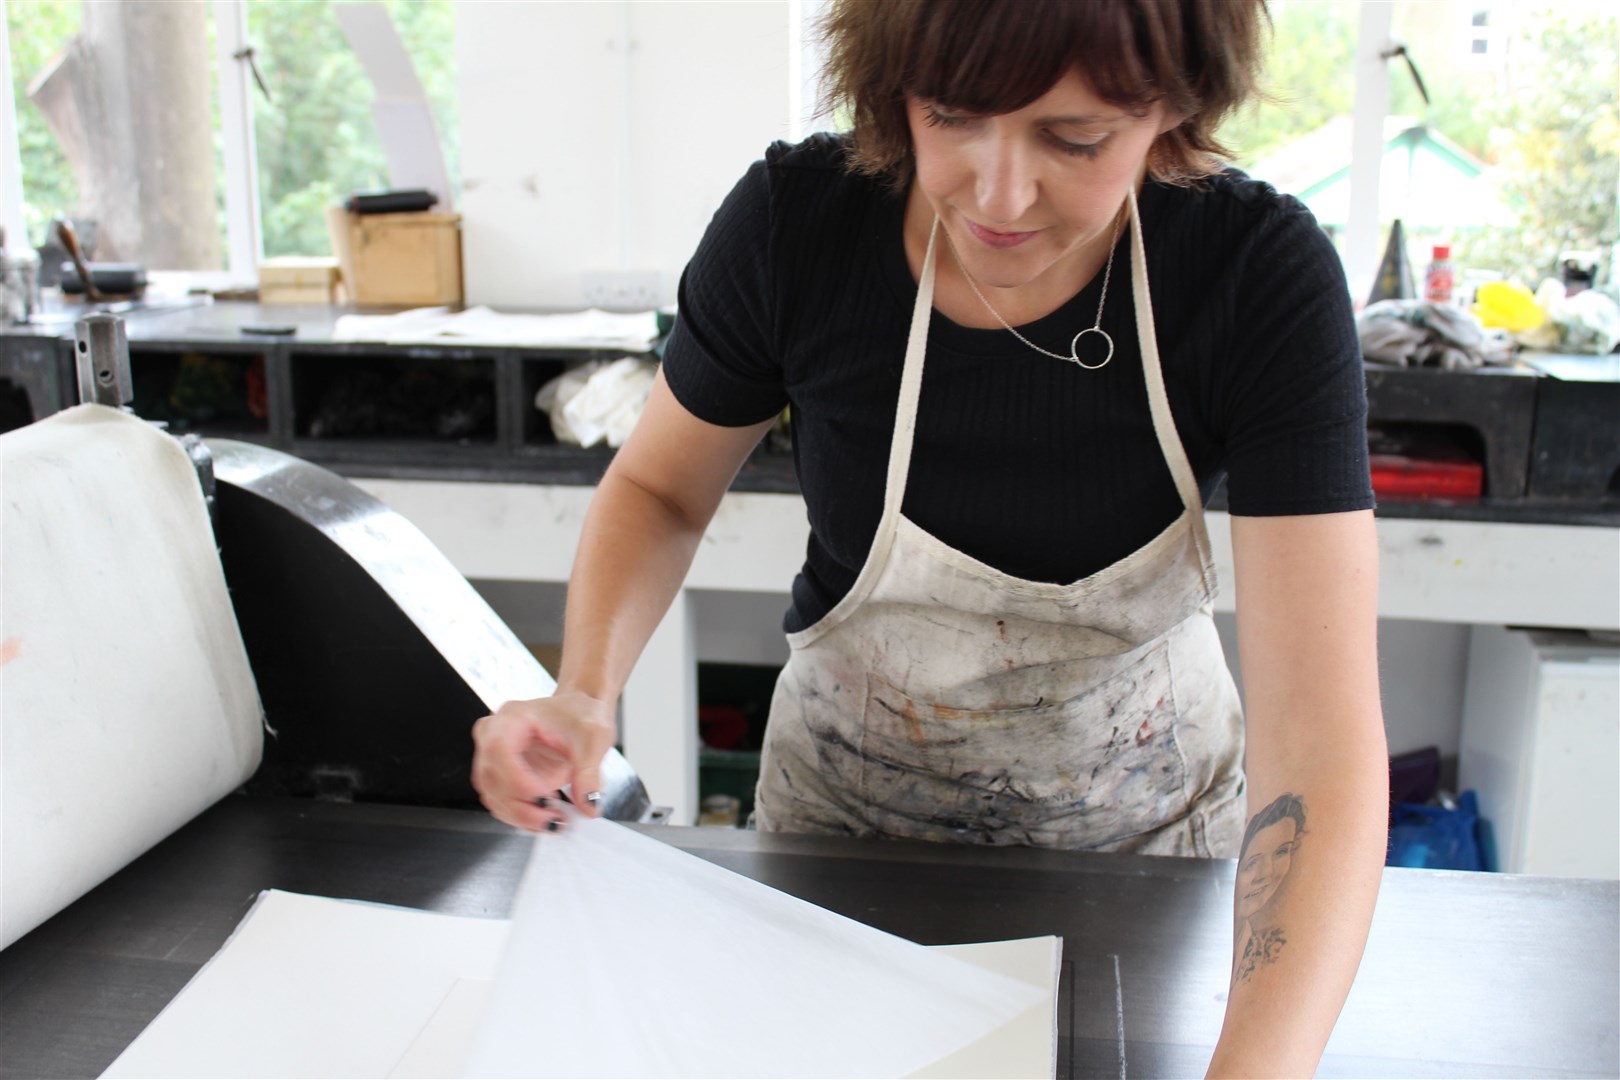 Artist Fiona Stewart, who is featured in the Press Gang exhibition, at the etching press.